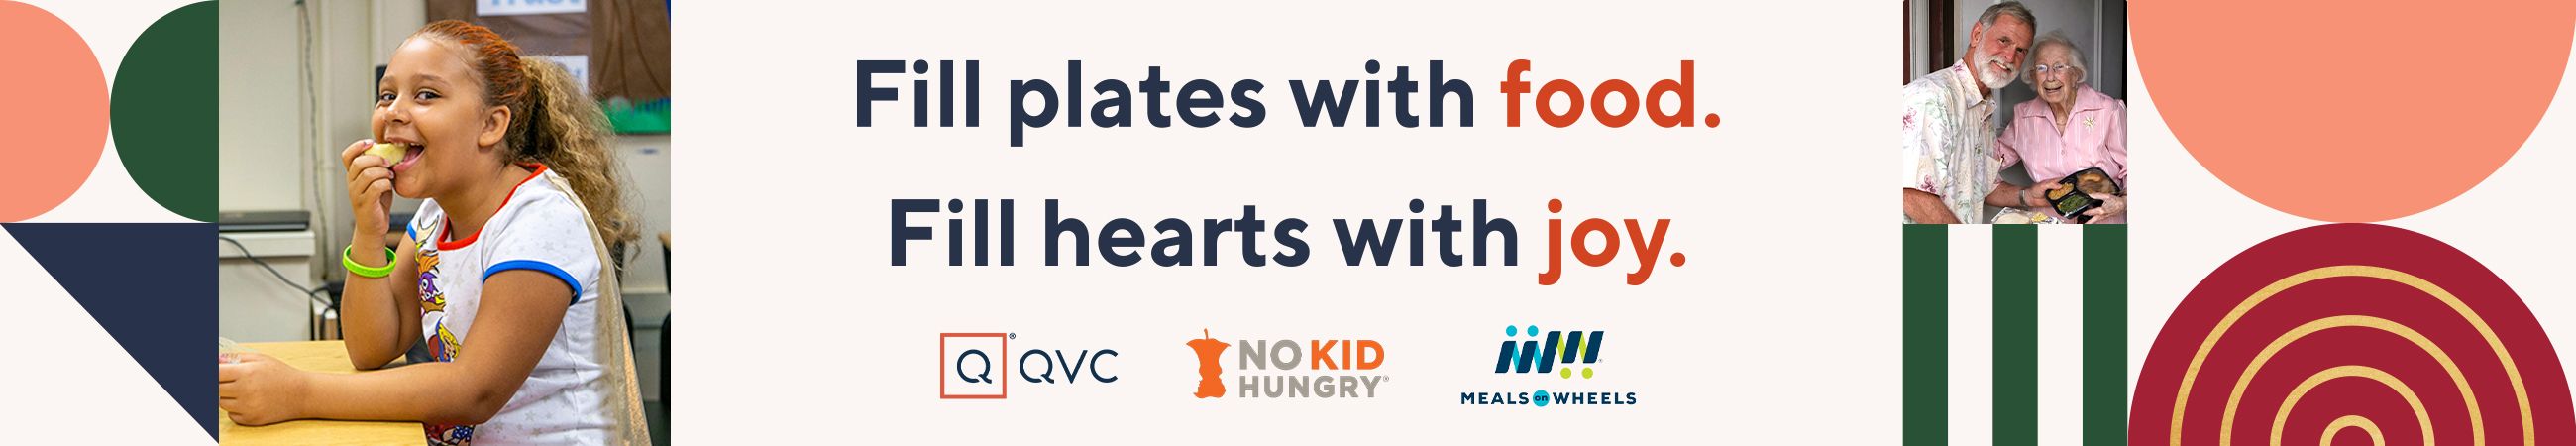 Fill plates with food. Fill hearts with joy. QVC + No Kid Hungry + Meals on Wheels